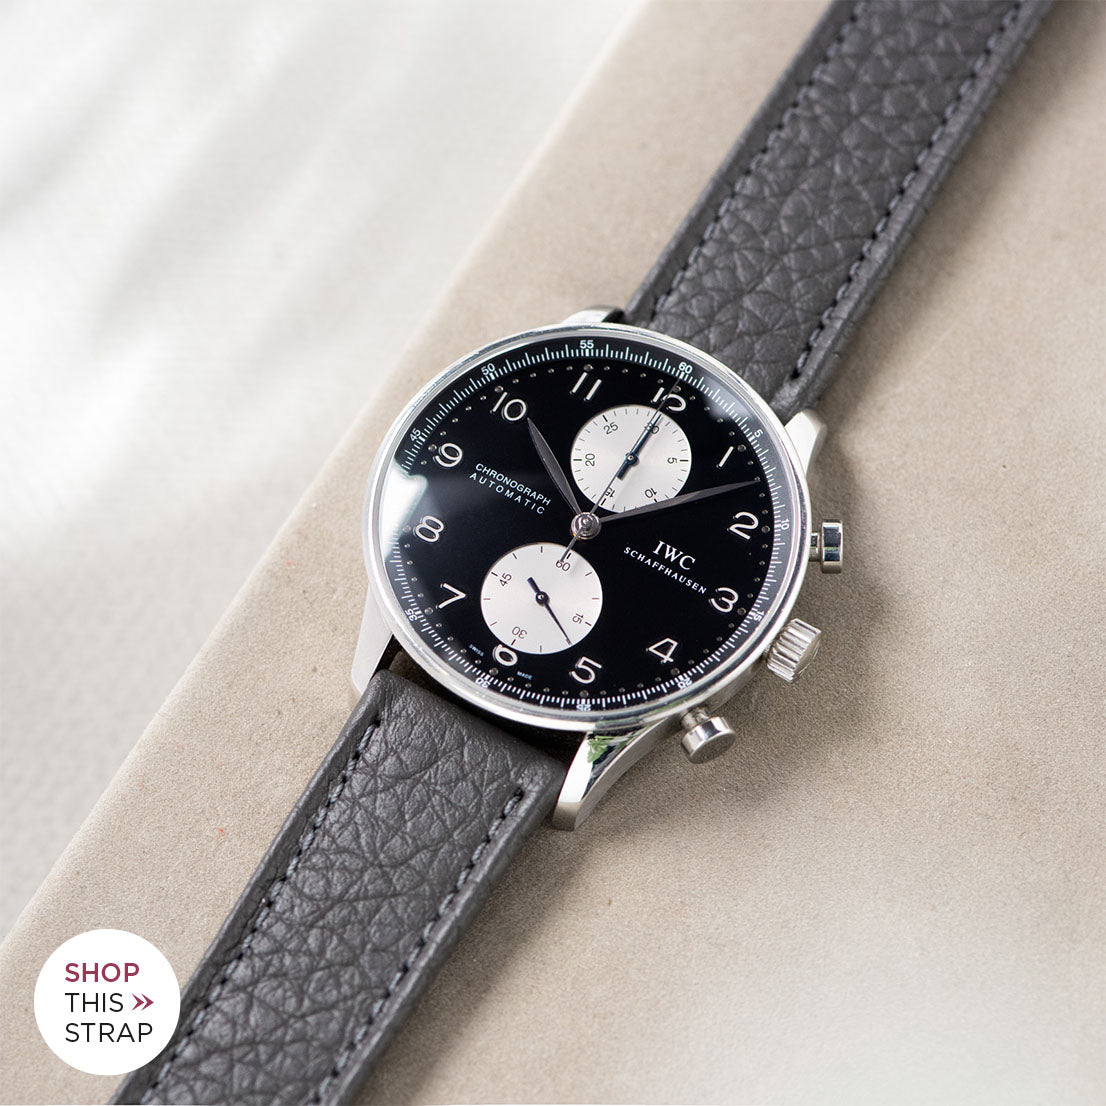 Bulang and Sons_Strap Guide_IWC-Portugieser_Taurillon Grey Heritage Leather Watch Strap